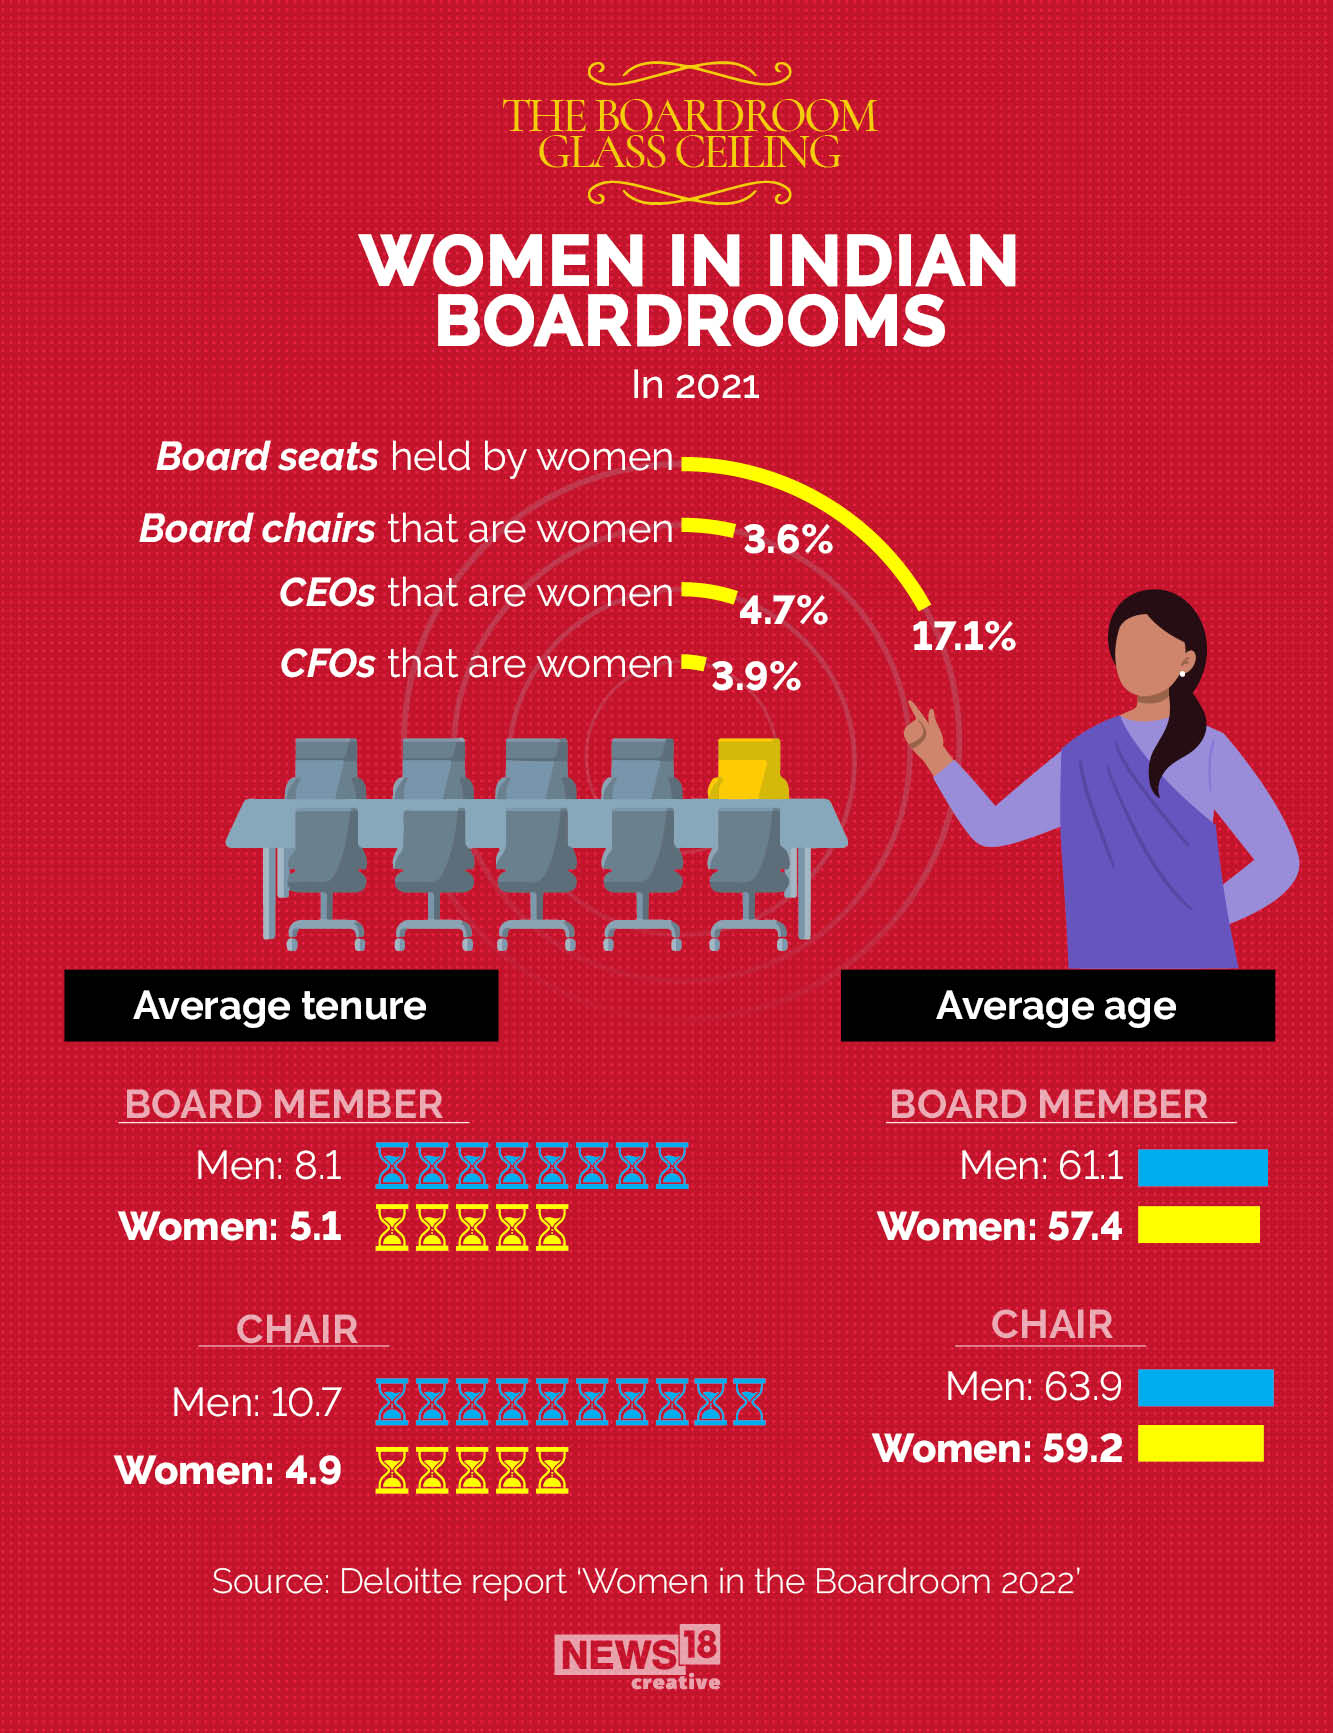 19.7 percent of board seats globally go to women. Is that a crack in the glass ceiling?